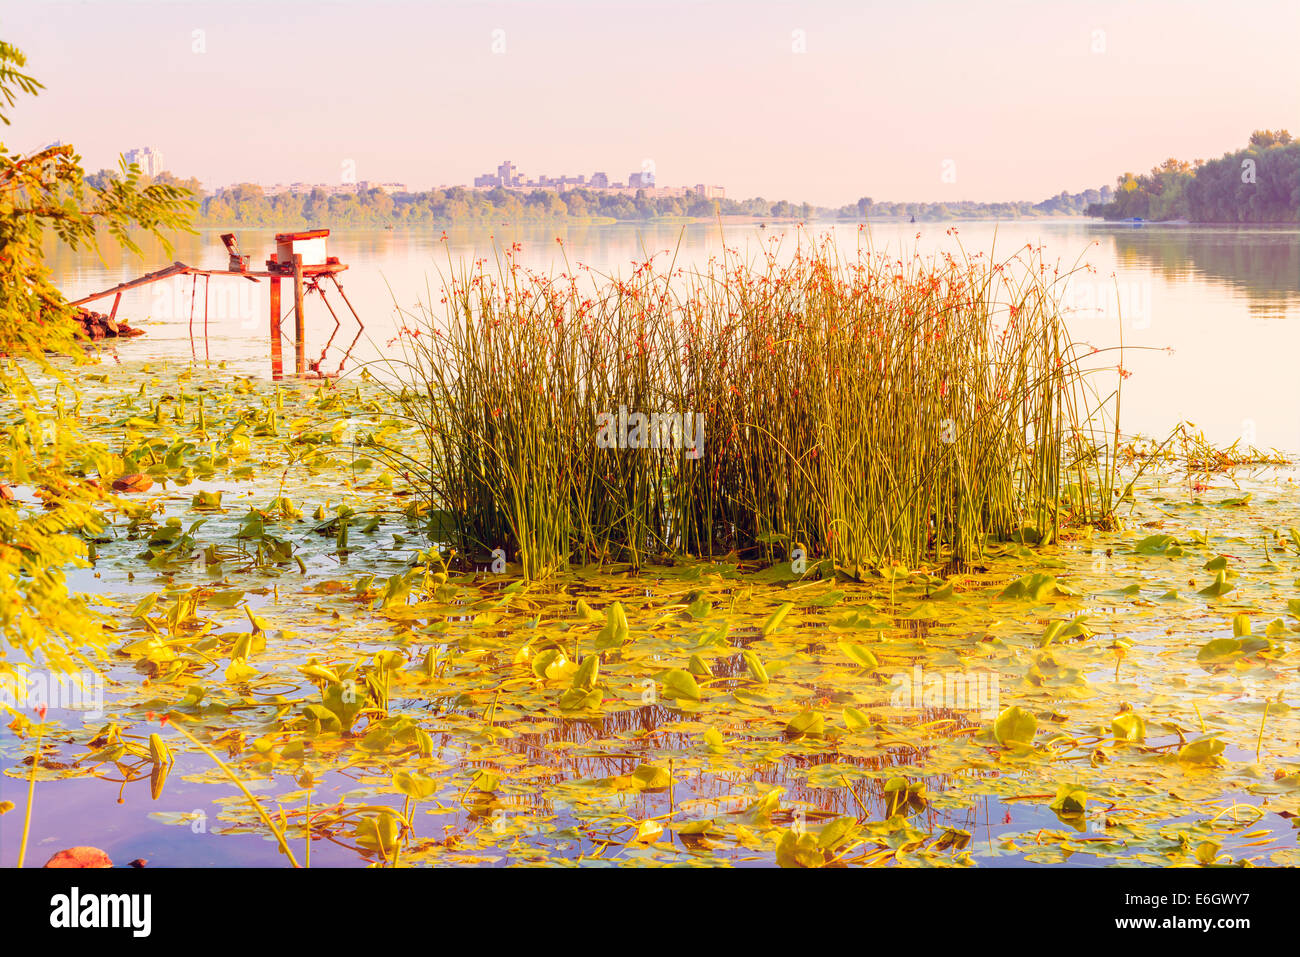 Scirpus plants and yellow waterlily in the misty river at sunrise Stock Photo